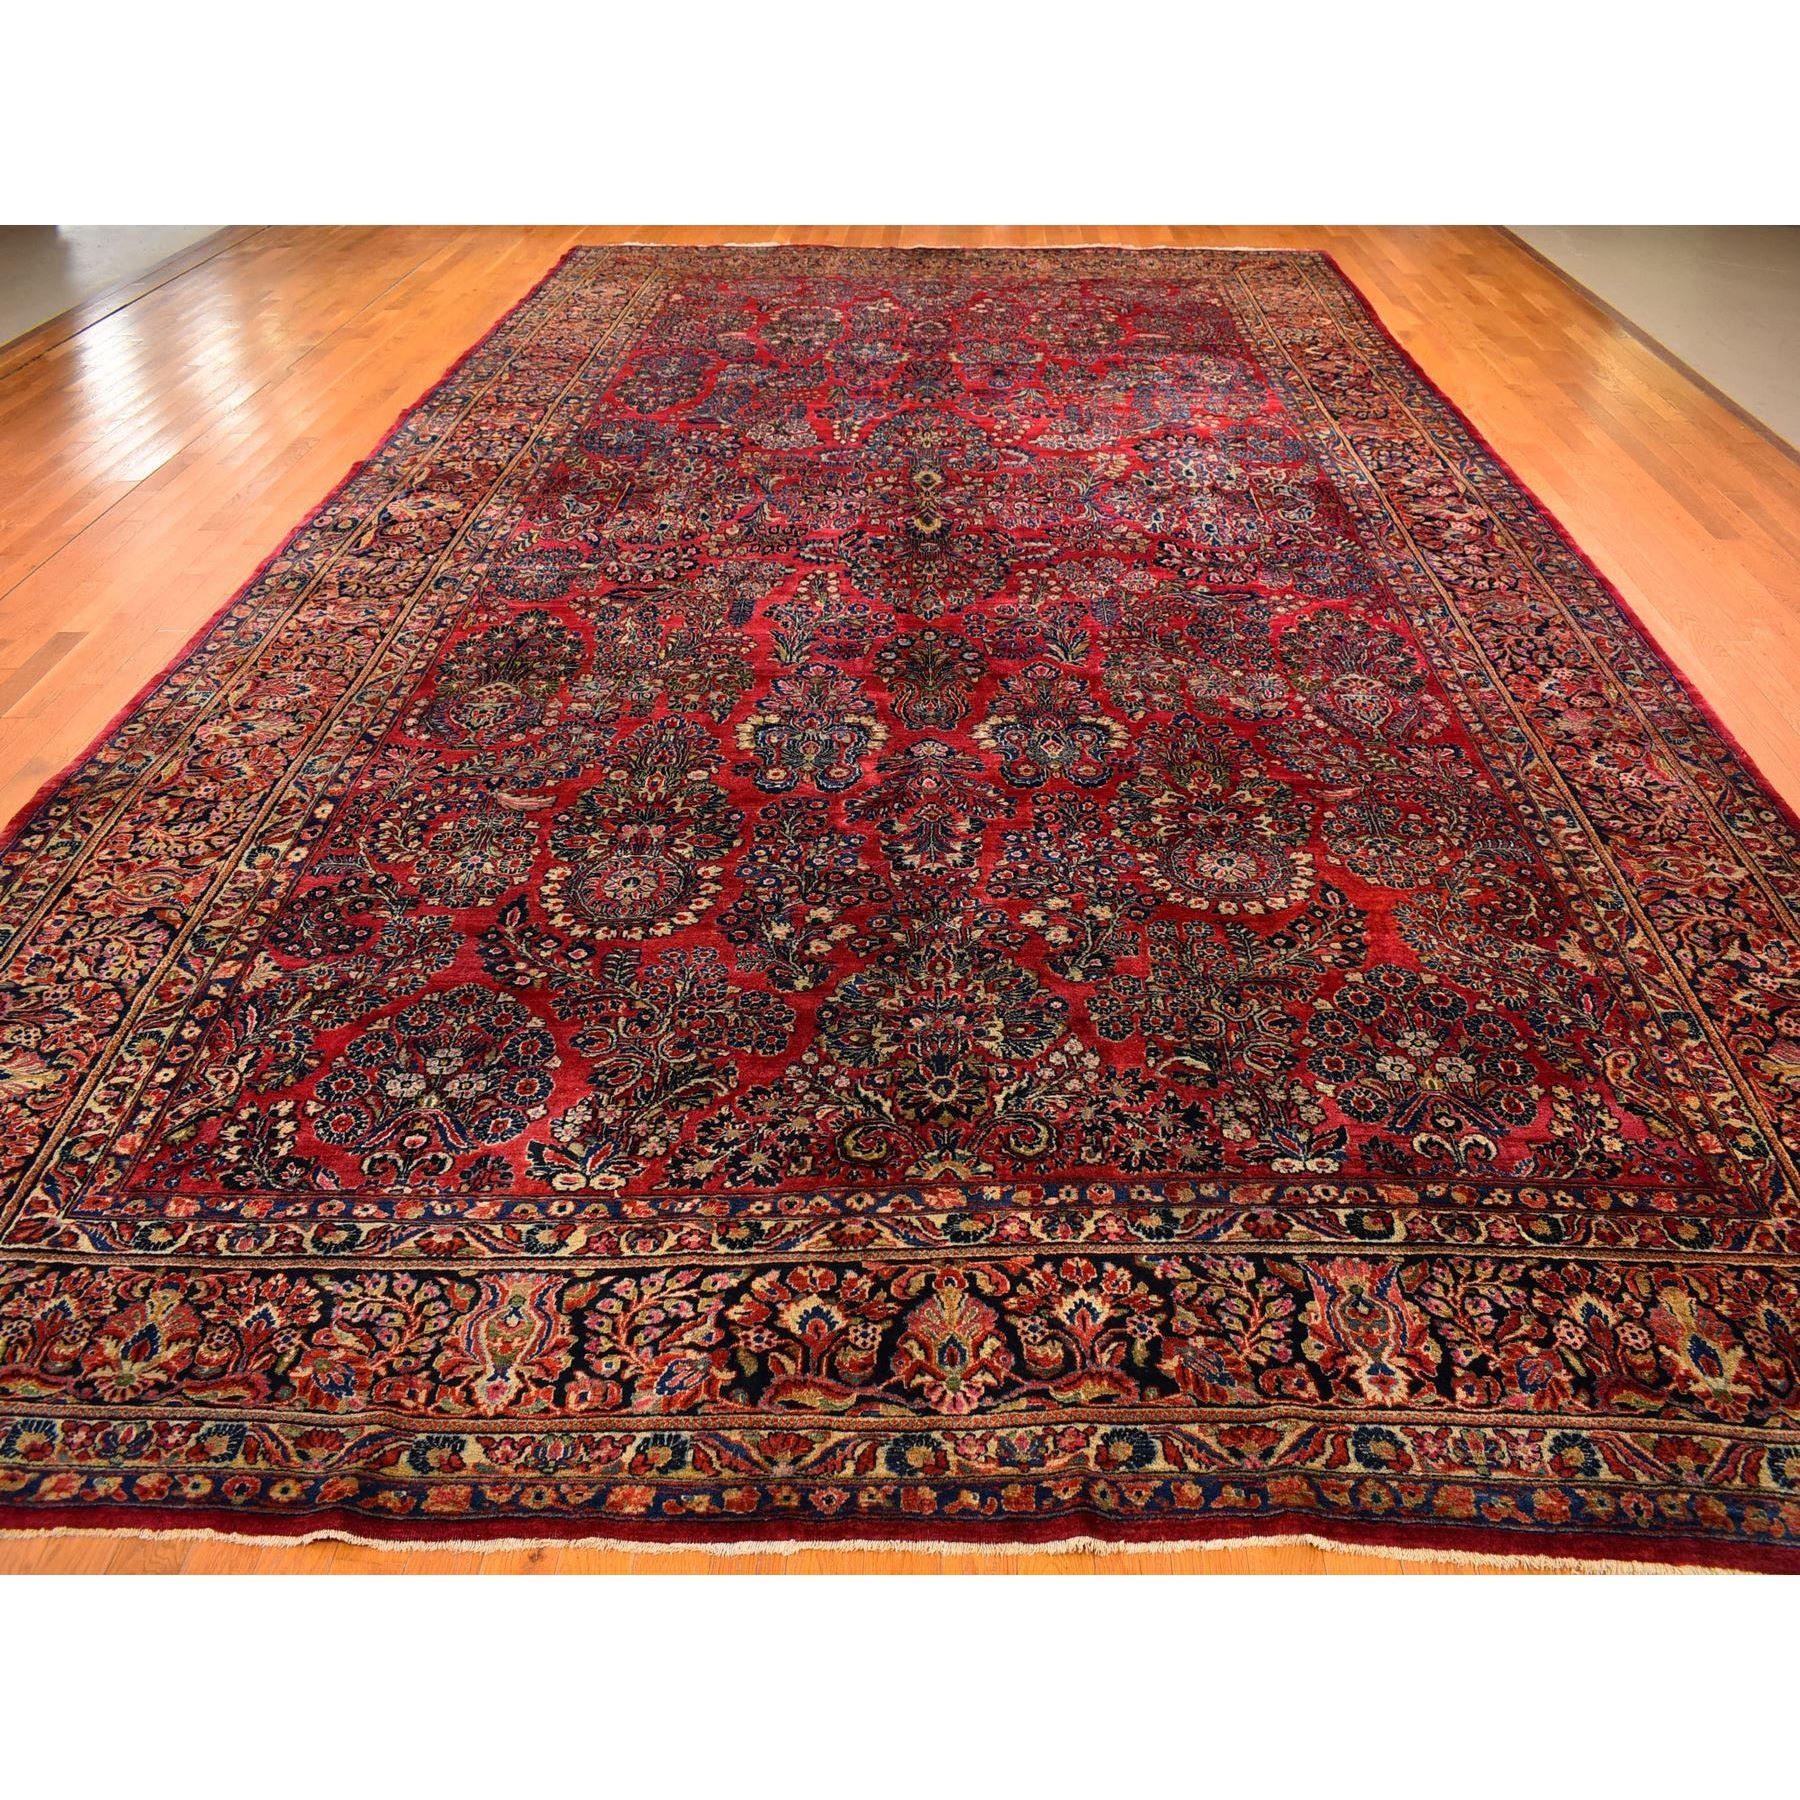 This fabulous hand-knotted carpet has been created and designed for extra strength and durability. This rug has been handcrafted for weeks in the traditional method that is used to make
Exact rug size in feet and inches : 11'2